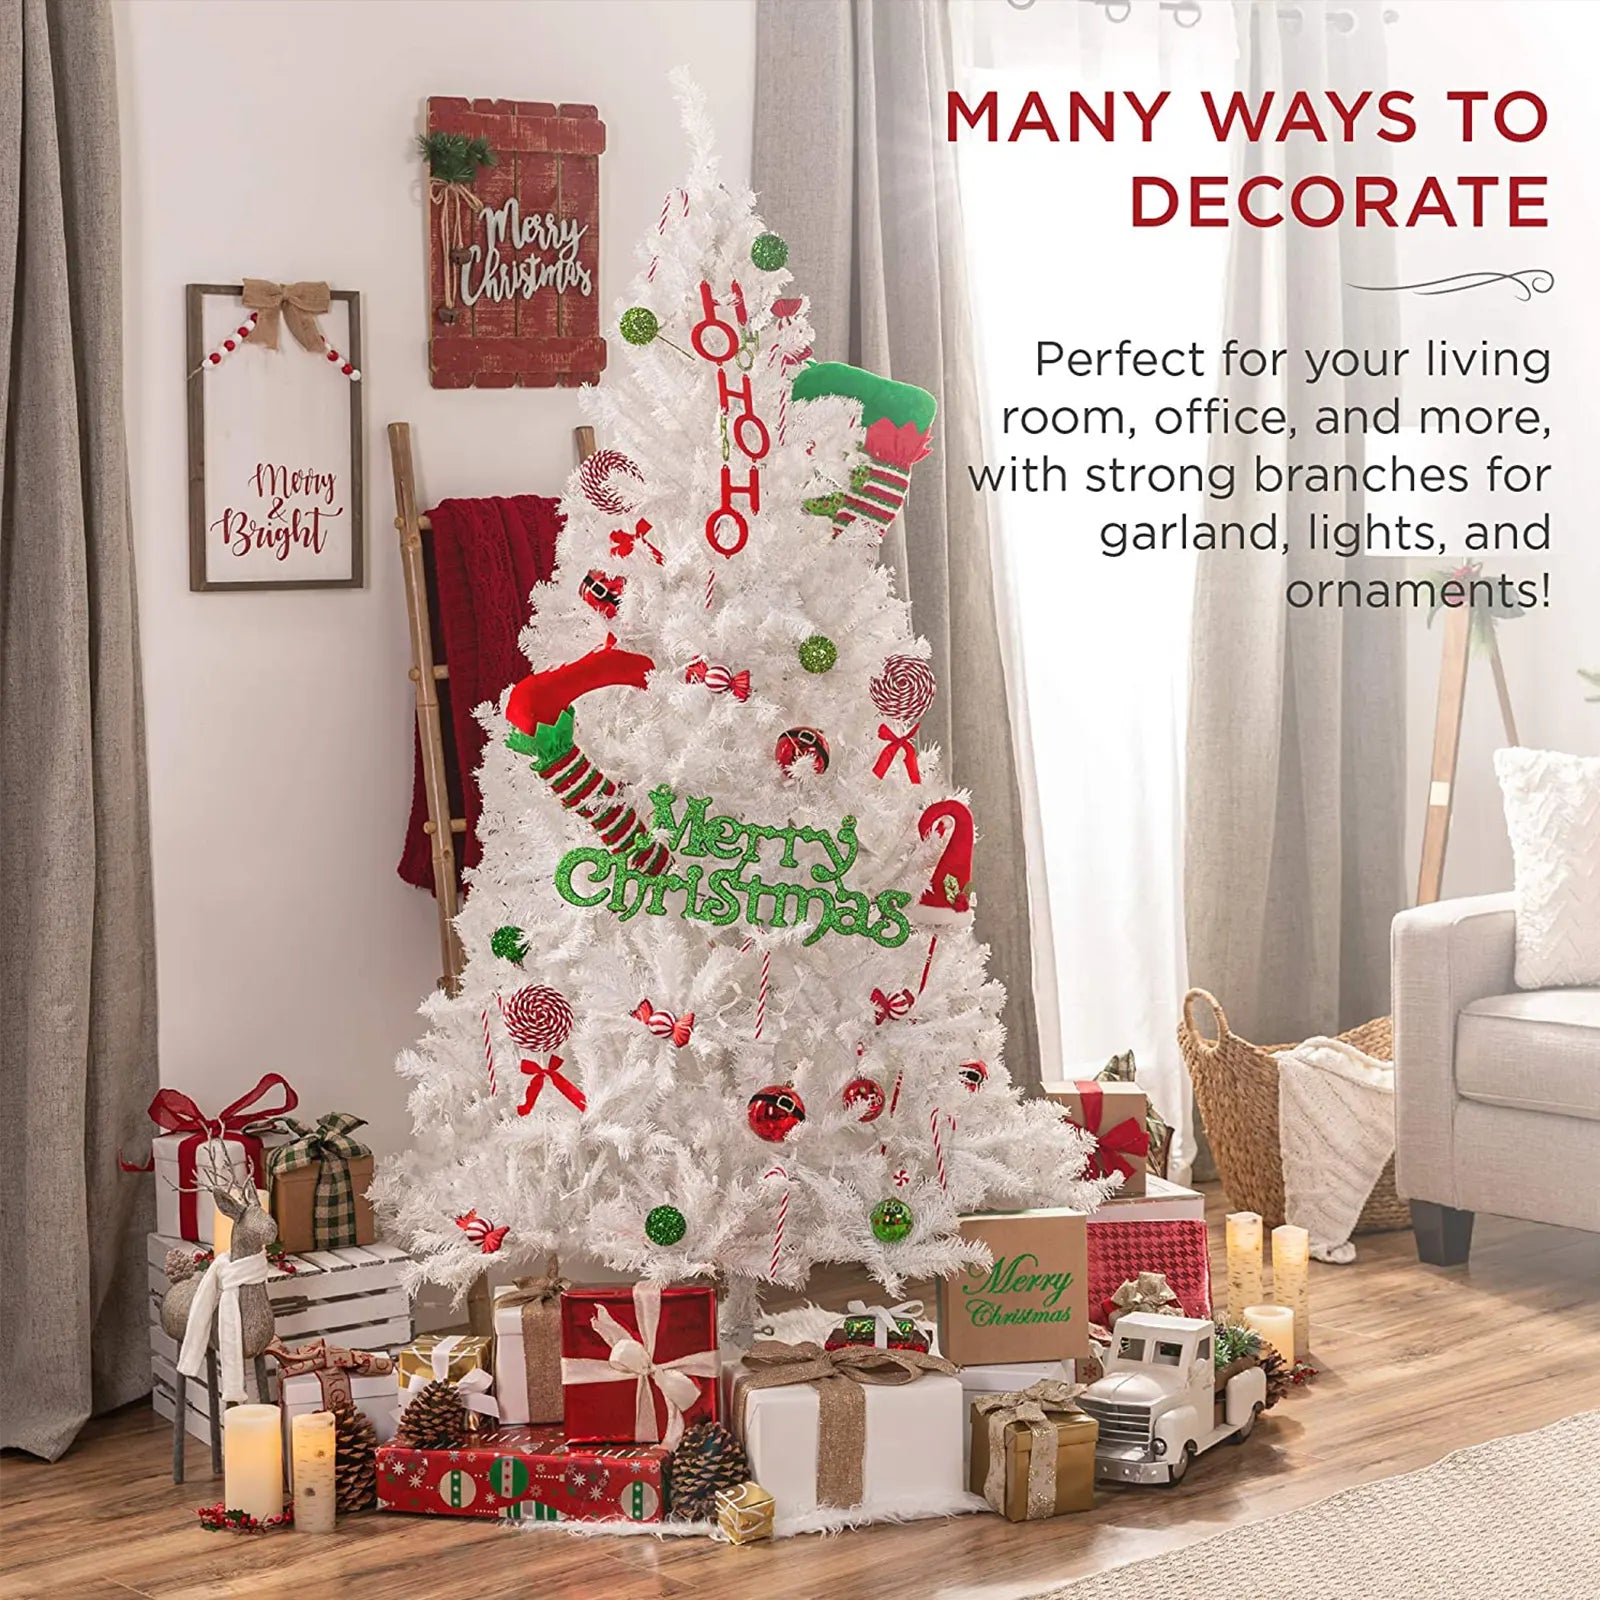 Products 6ft Premium Hinged Artificial Holiday Christmas Tree for Home, Office, Party Decoration